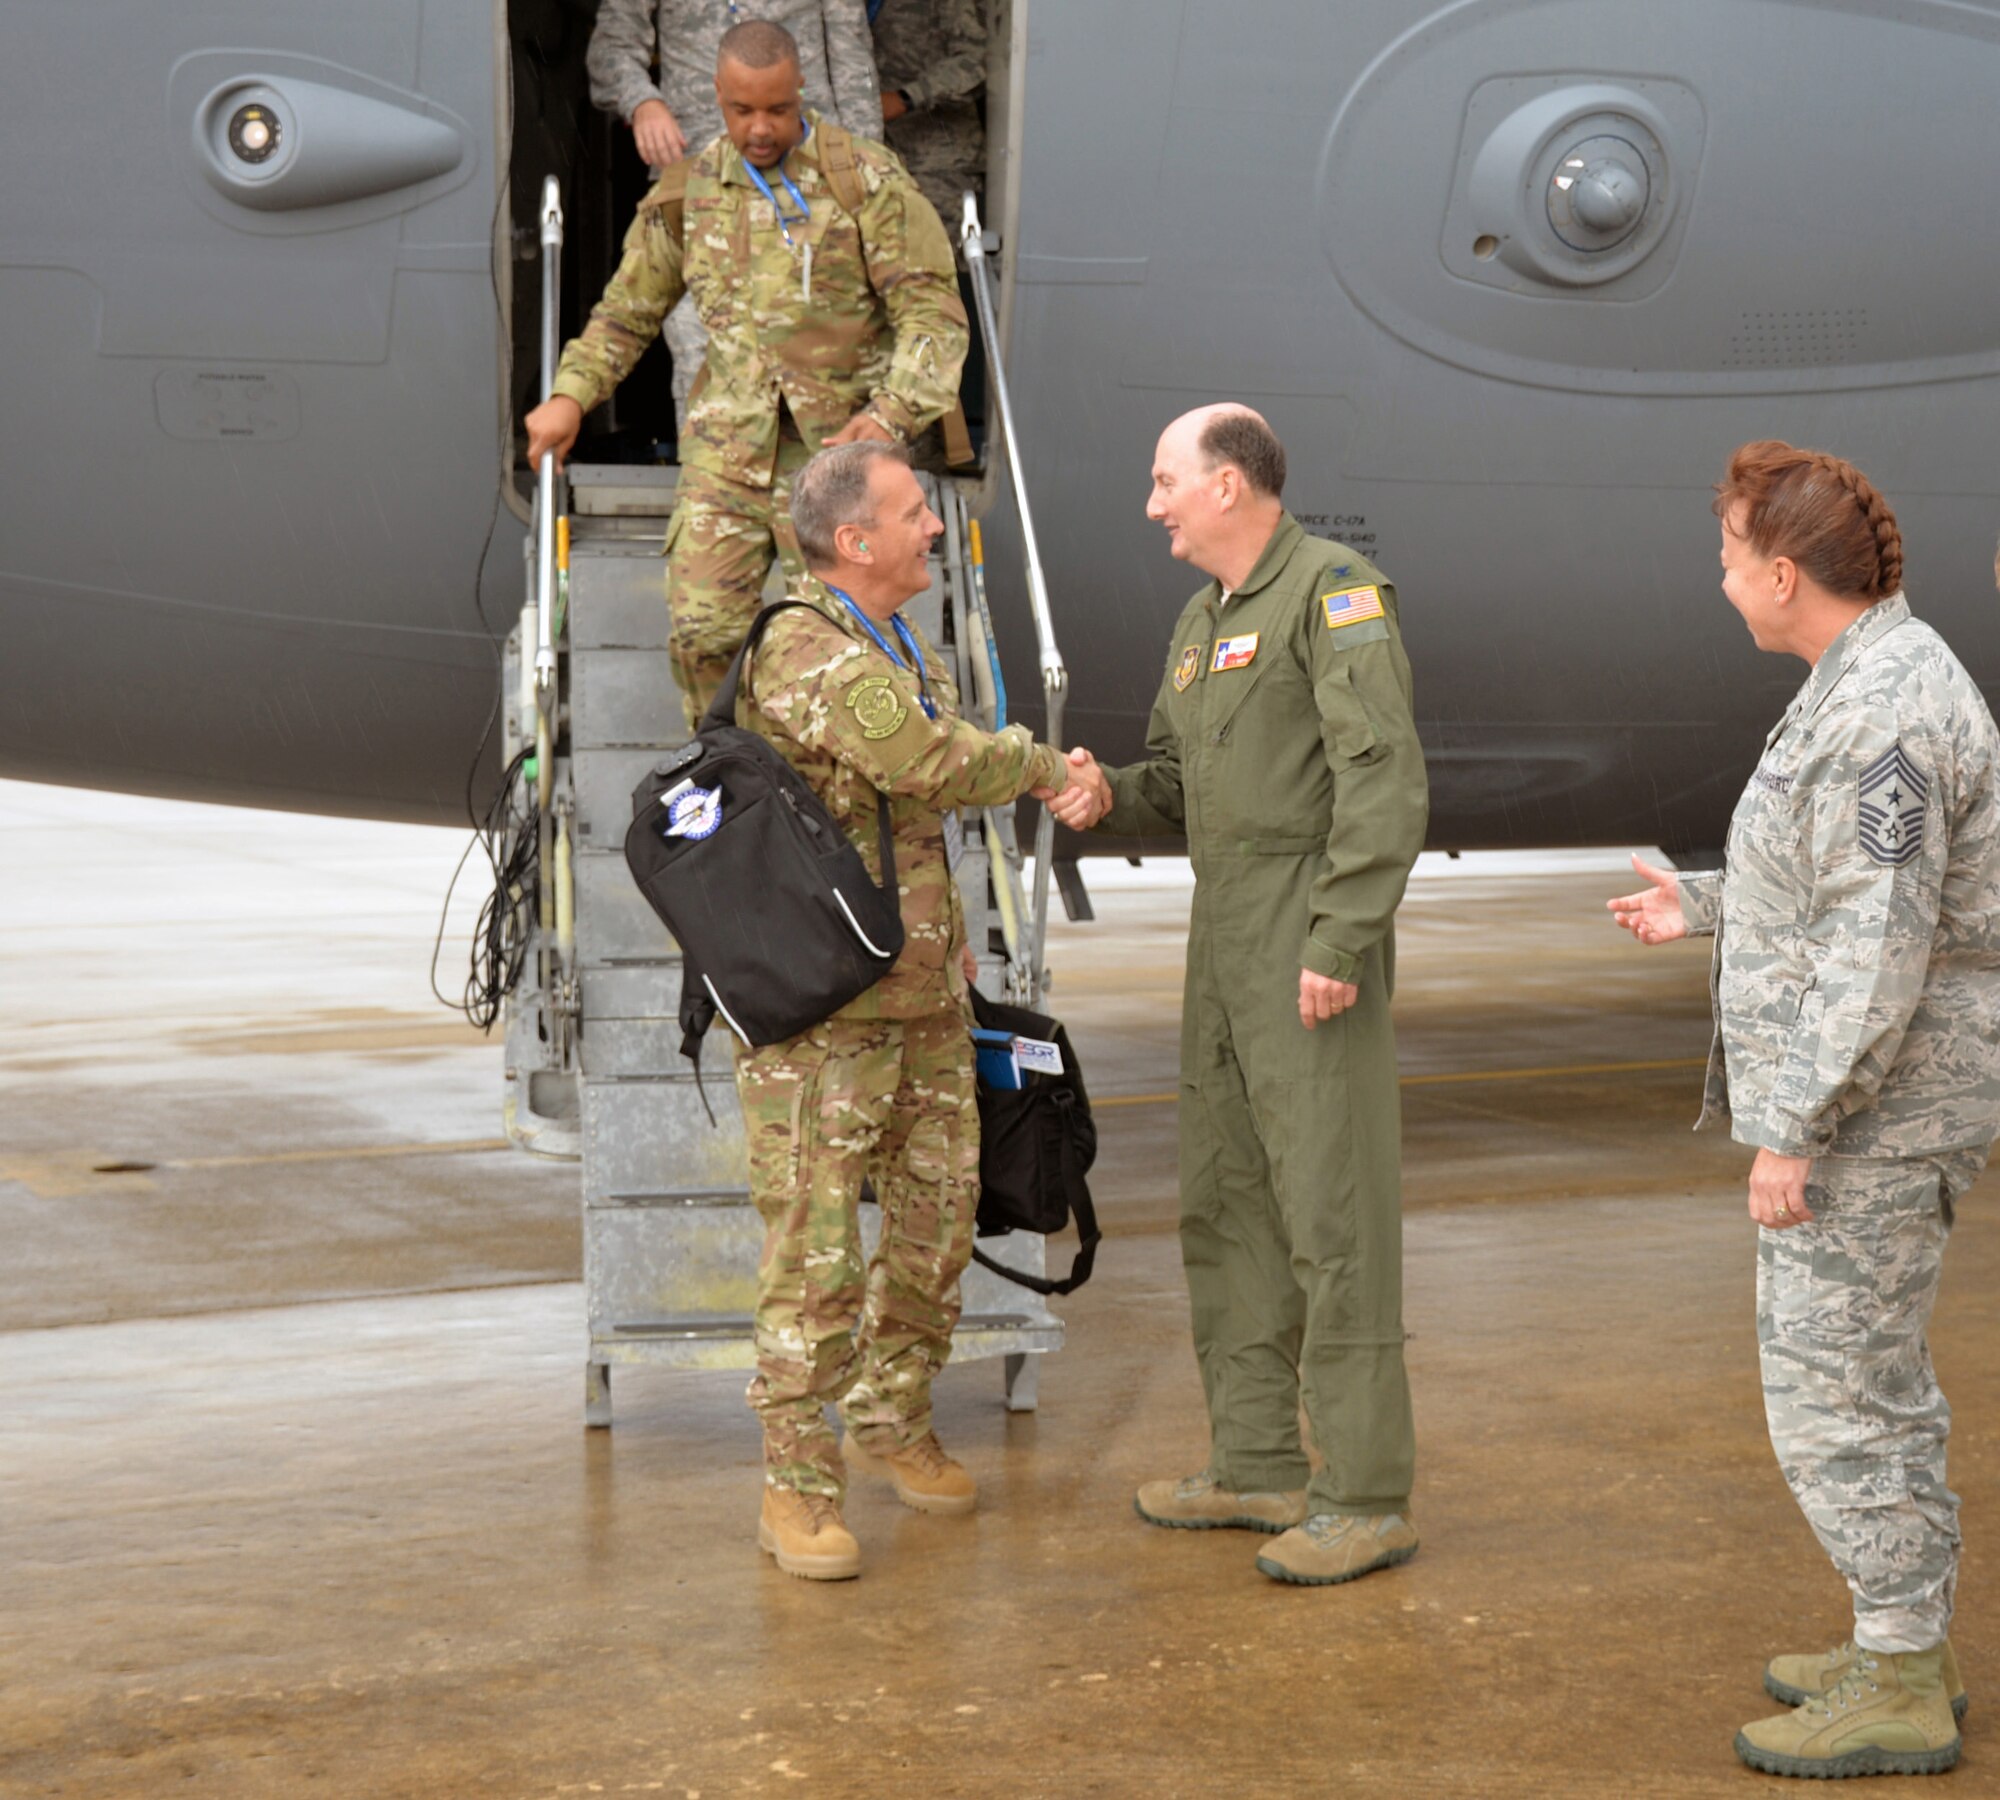 Maj. Gen. Randall A. Ogden, 4th Air Force commander, and 4th AF Command Chief Master Sgt. Timothy C. White Jr. deplane and are greeted by Col. Thomas K. Smith Jr., 433rd Airlift Wing commander, and 433rd AW Command Chief Master Sgt. Shana C. Cullum at Joint Base San Antonio-Lackland, Texas Oct. 1, 2018.